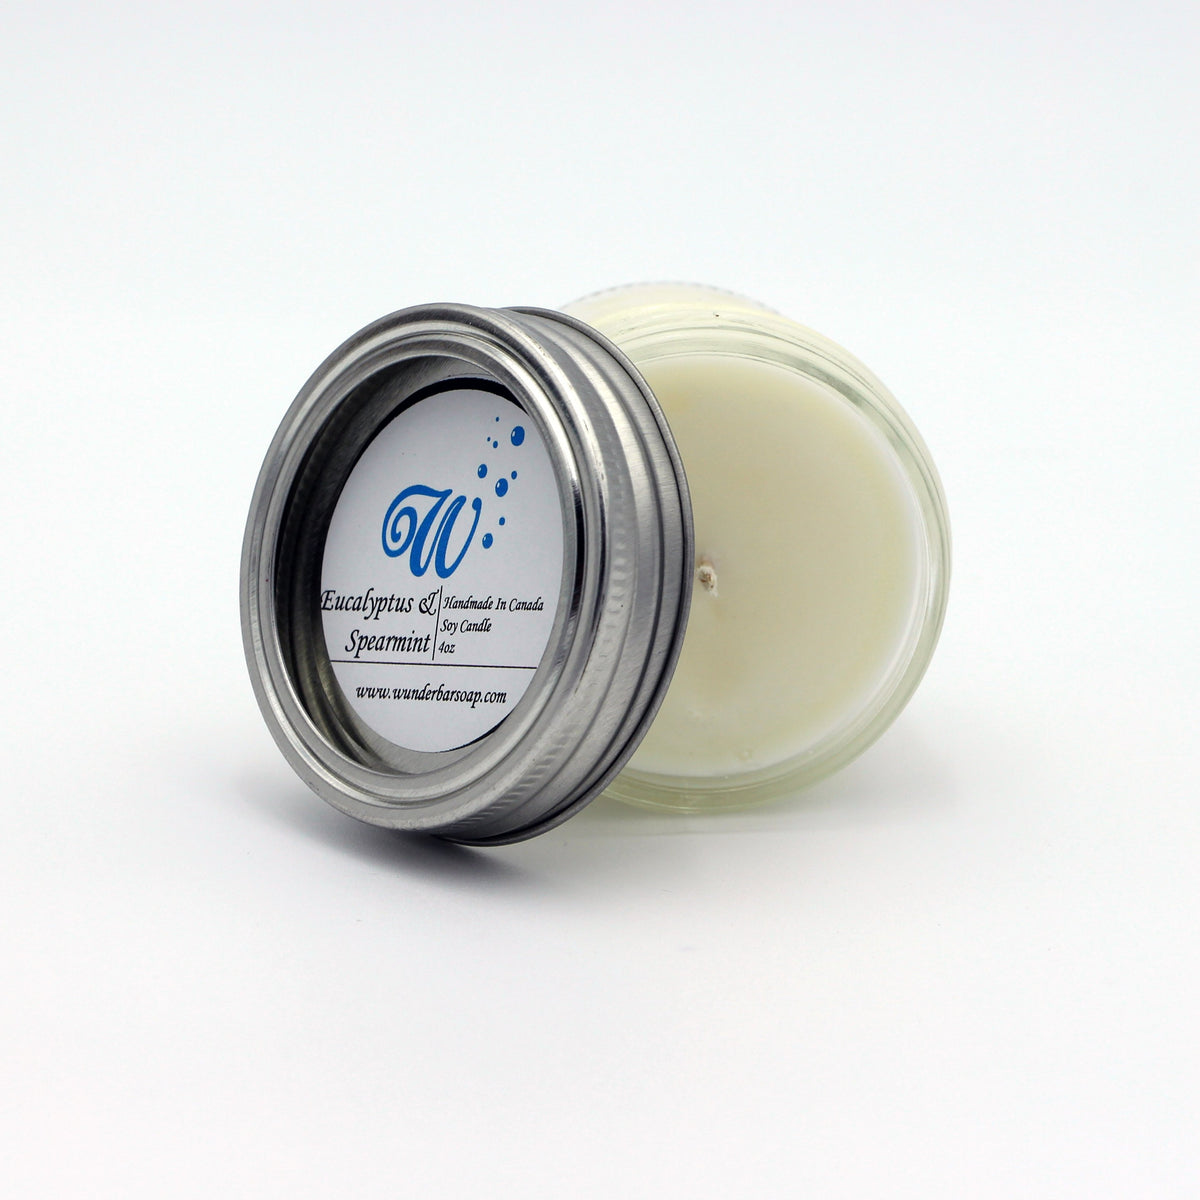 soy candles canada, soy candles ontario, handmade candles, handmade soy candles, men&#39;s candles, man candles, eucalyptus candles, spearmint candle, environmentally friendly candles, refreshing candles, 